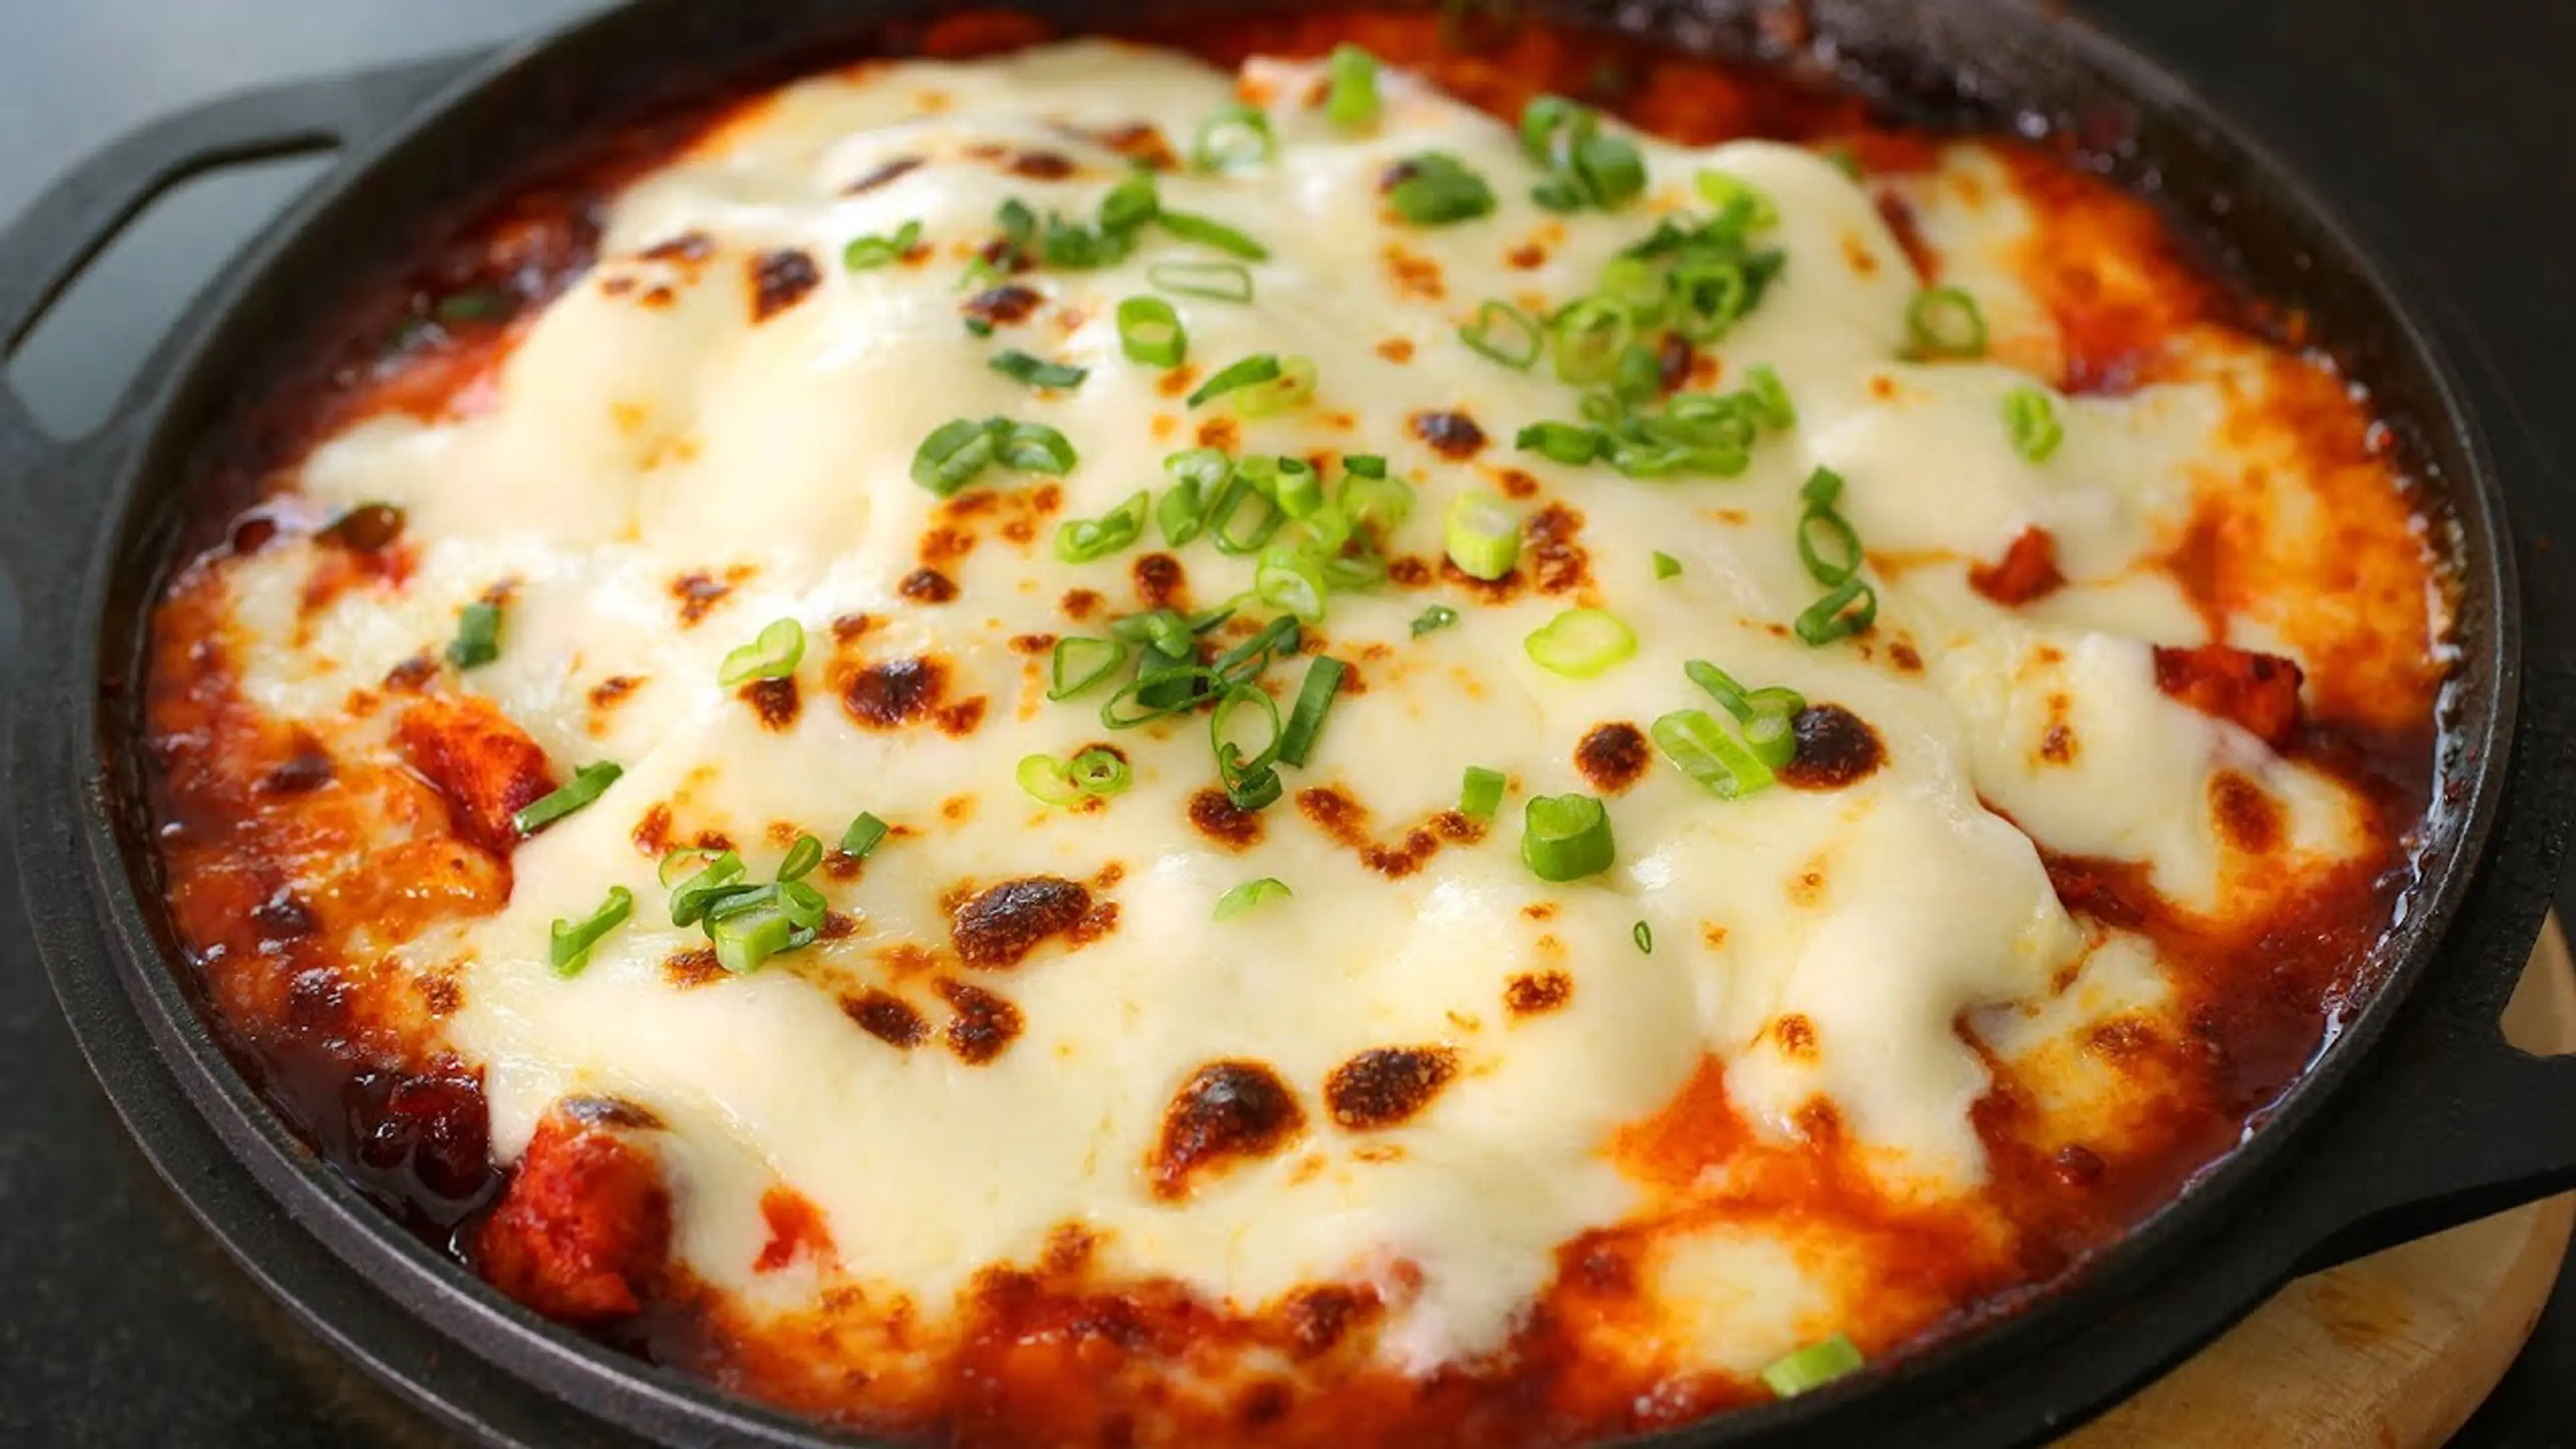 Fire chicken with cheese (Cheese buldak: 치즈불닭)